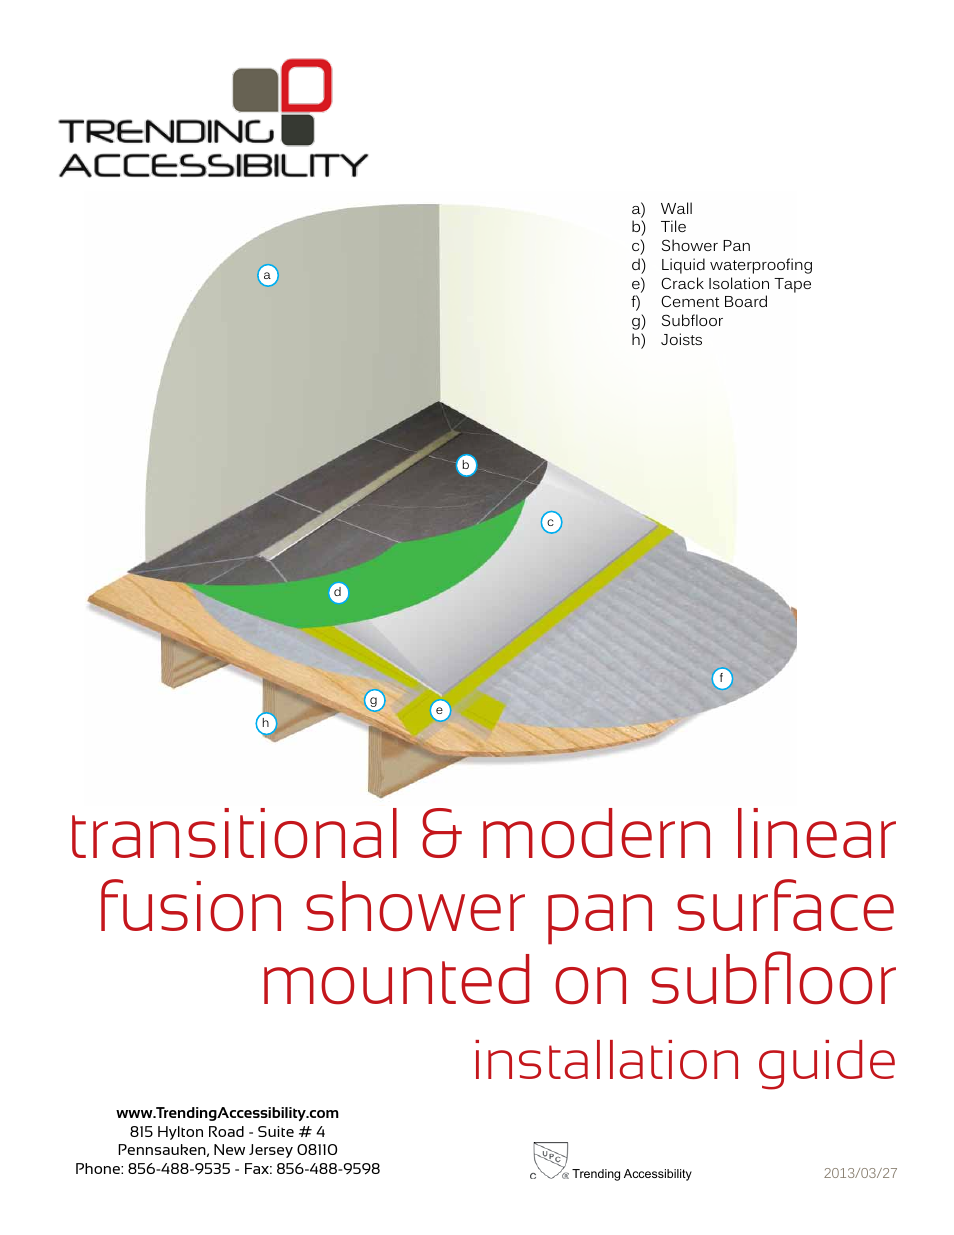 Transitional & modern linear fusion shower pan surface mounted on subfloor